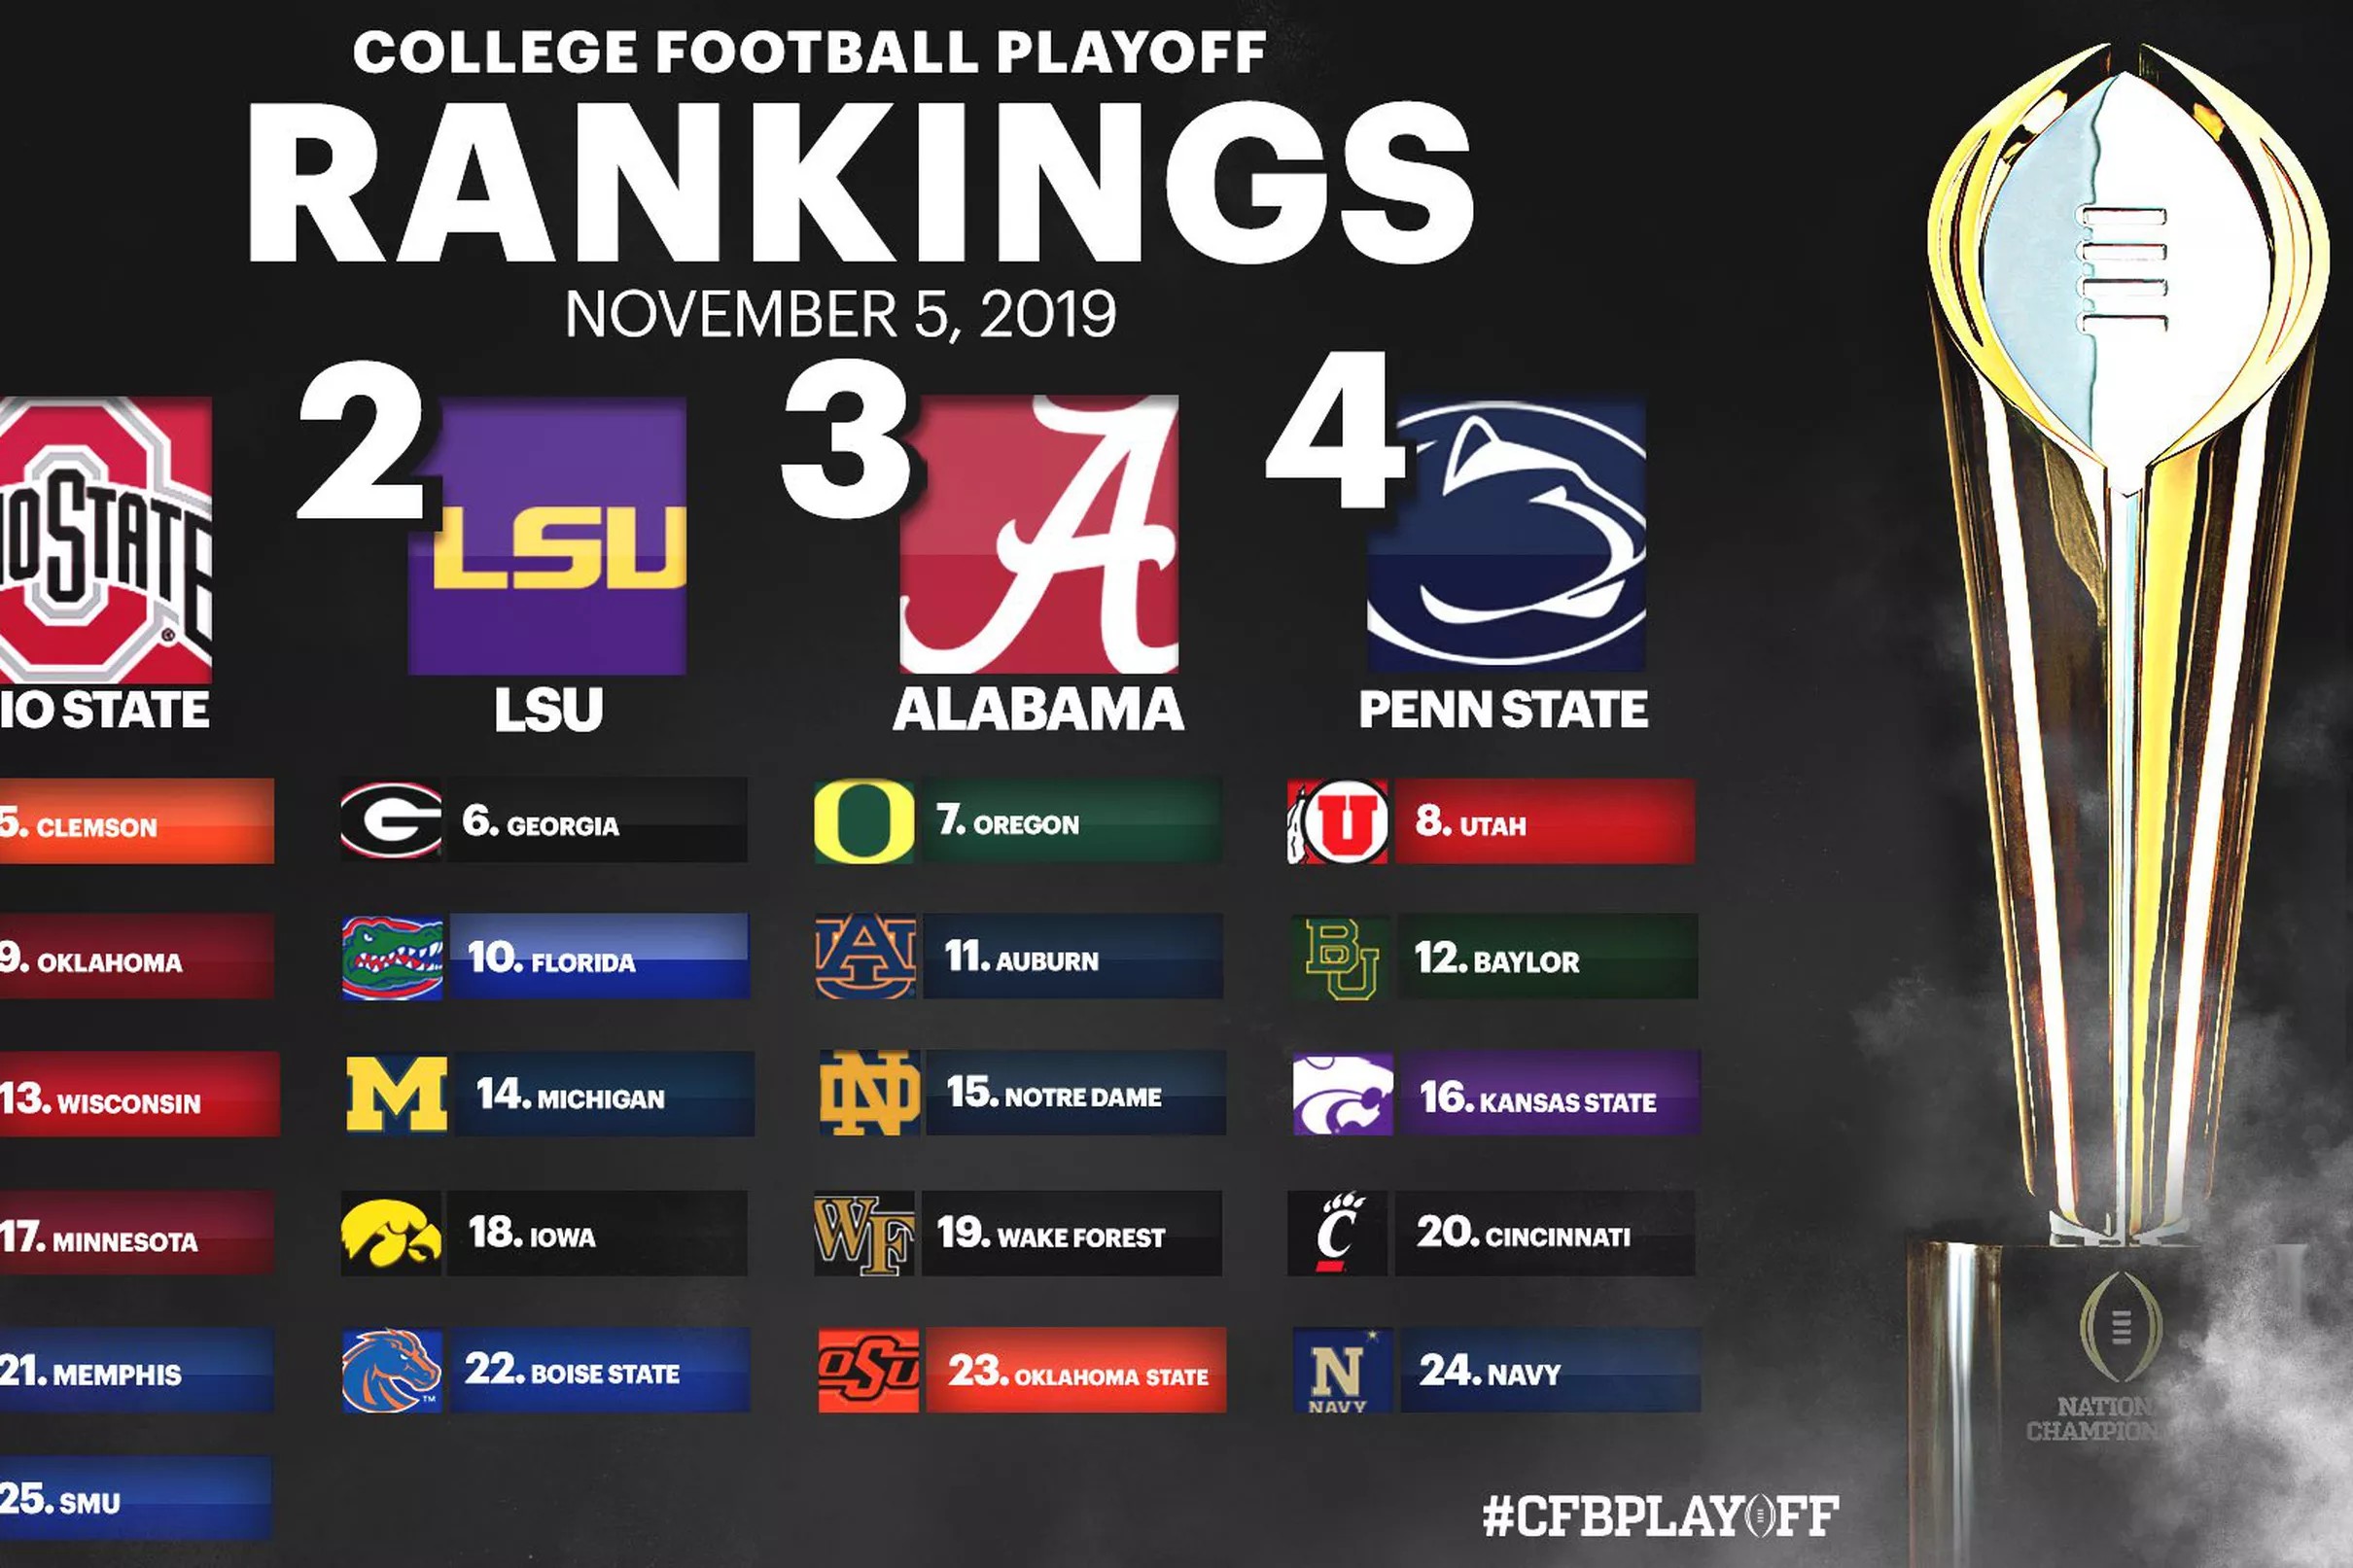 Utes ranked No. 8 in first College Football Playoff Poll of 2019